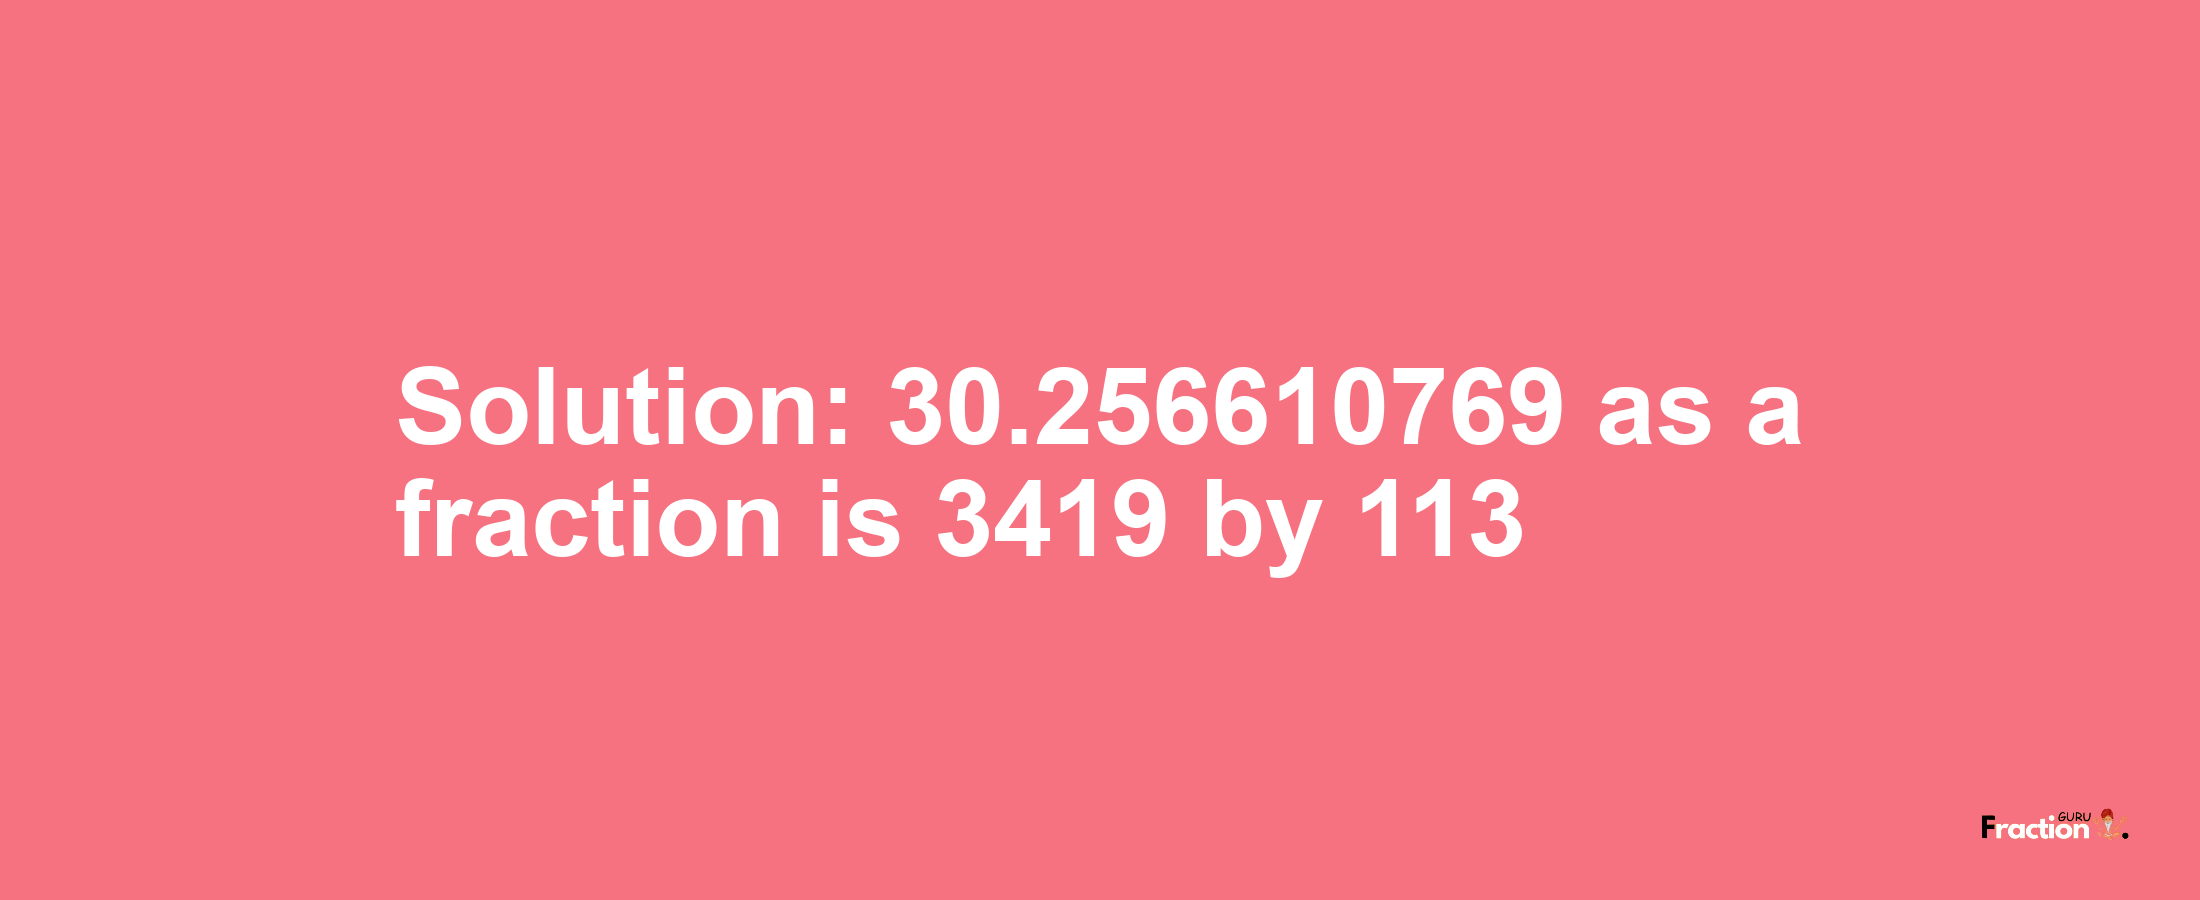 Solution:30.256610769 as a fraction is 3419/113